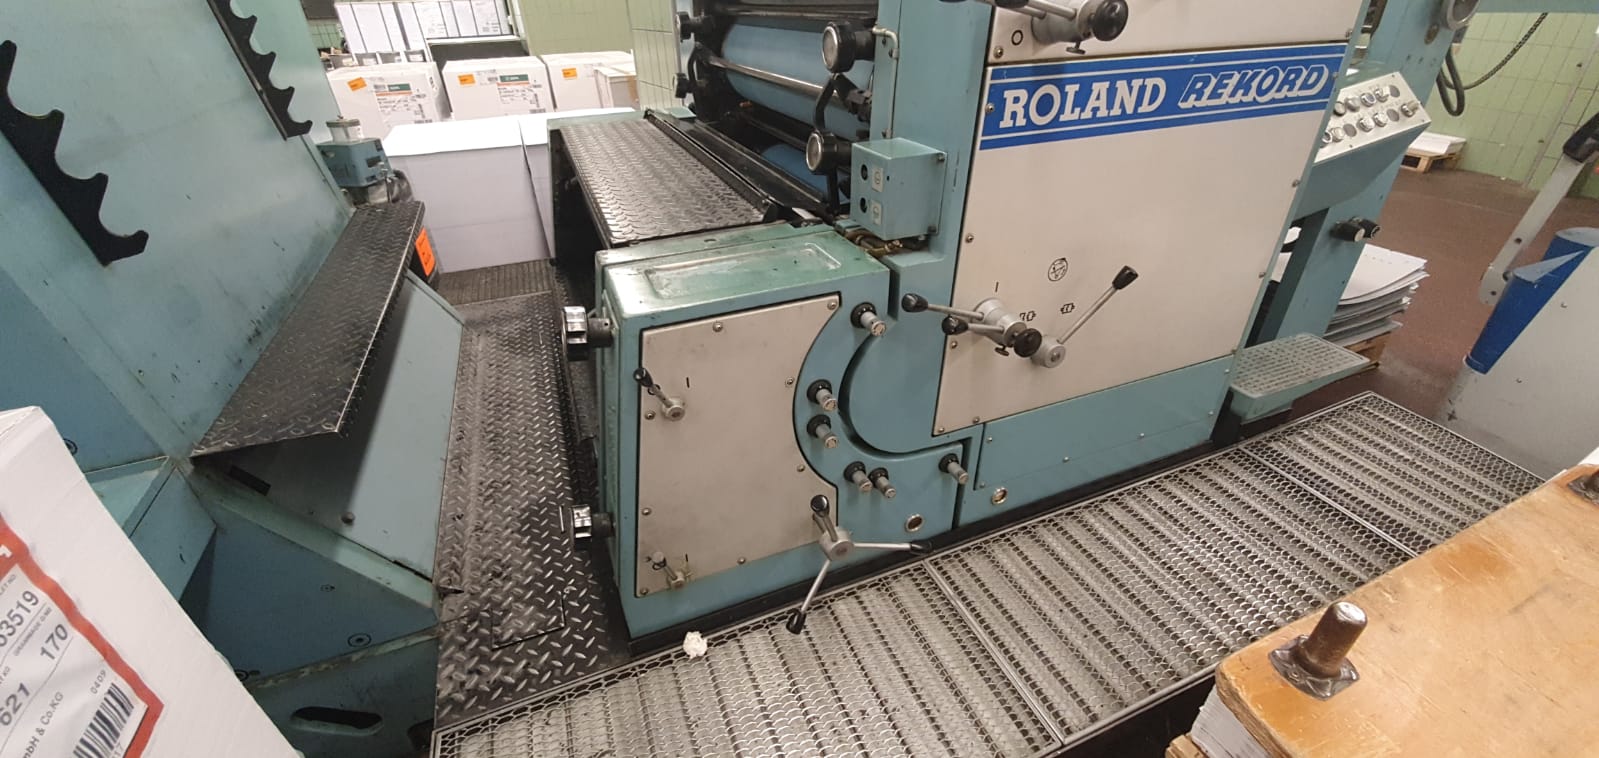 Roland Rekord two color Max. Format 102 cm Year of construction 1980 Stream feeder conventional dampening system